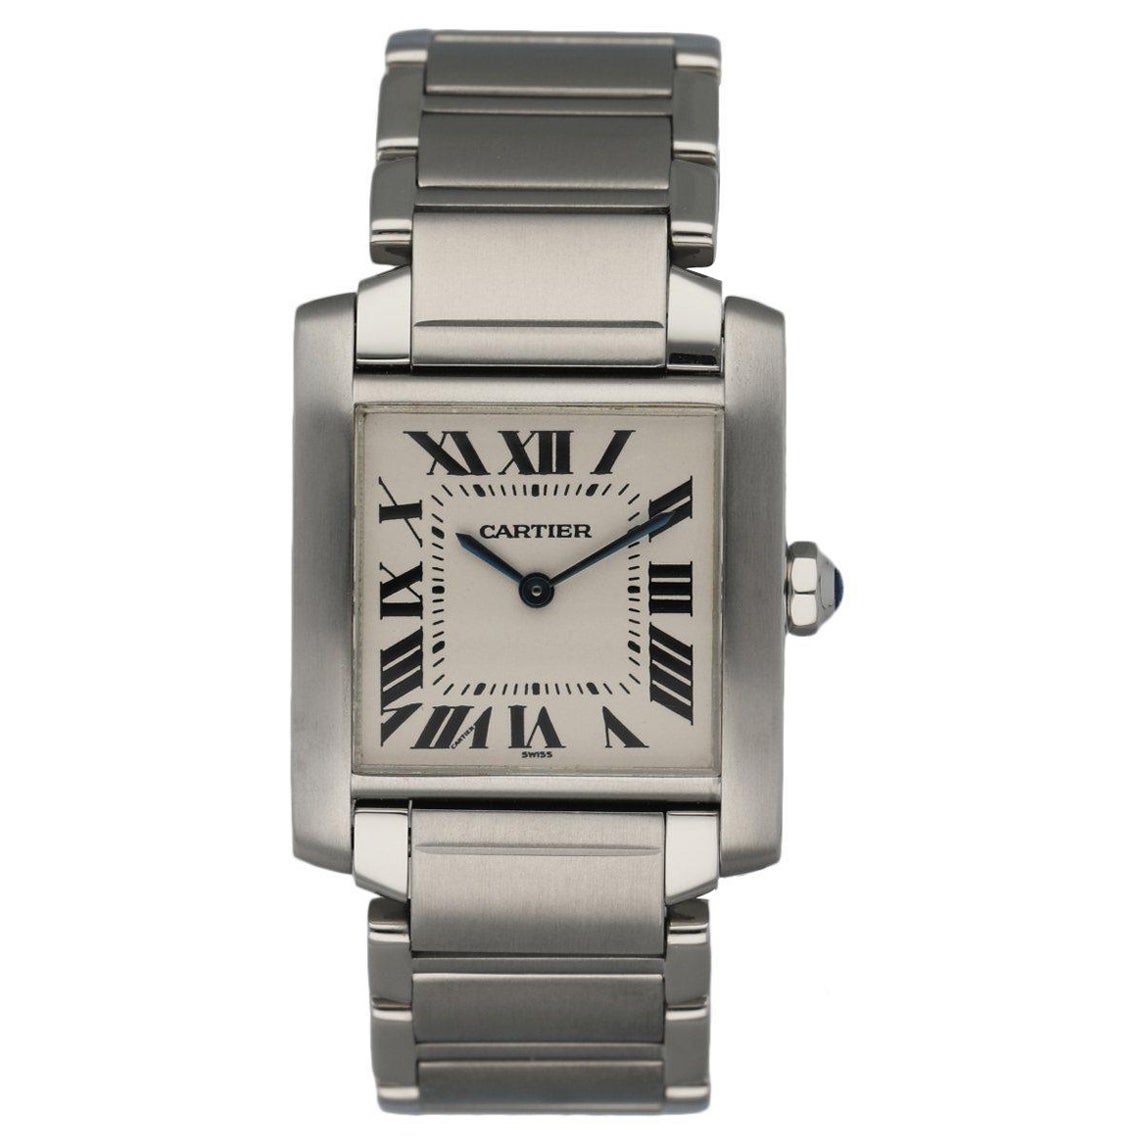 Cartier Tank Francaise 2301 Stainless Steel Ladies Watch